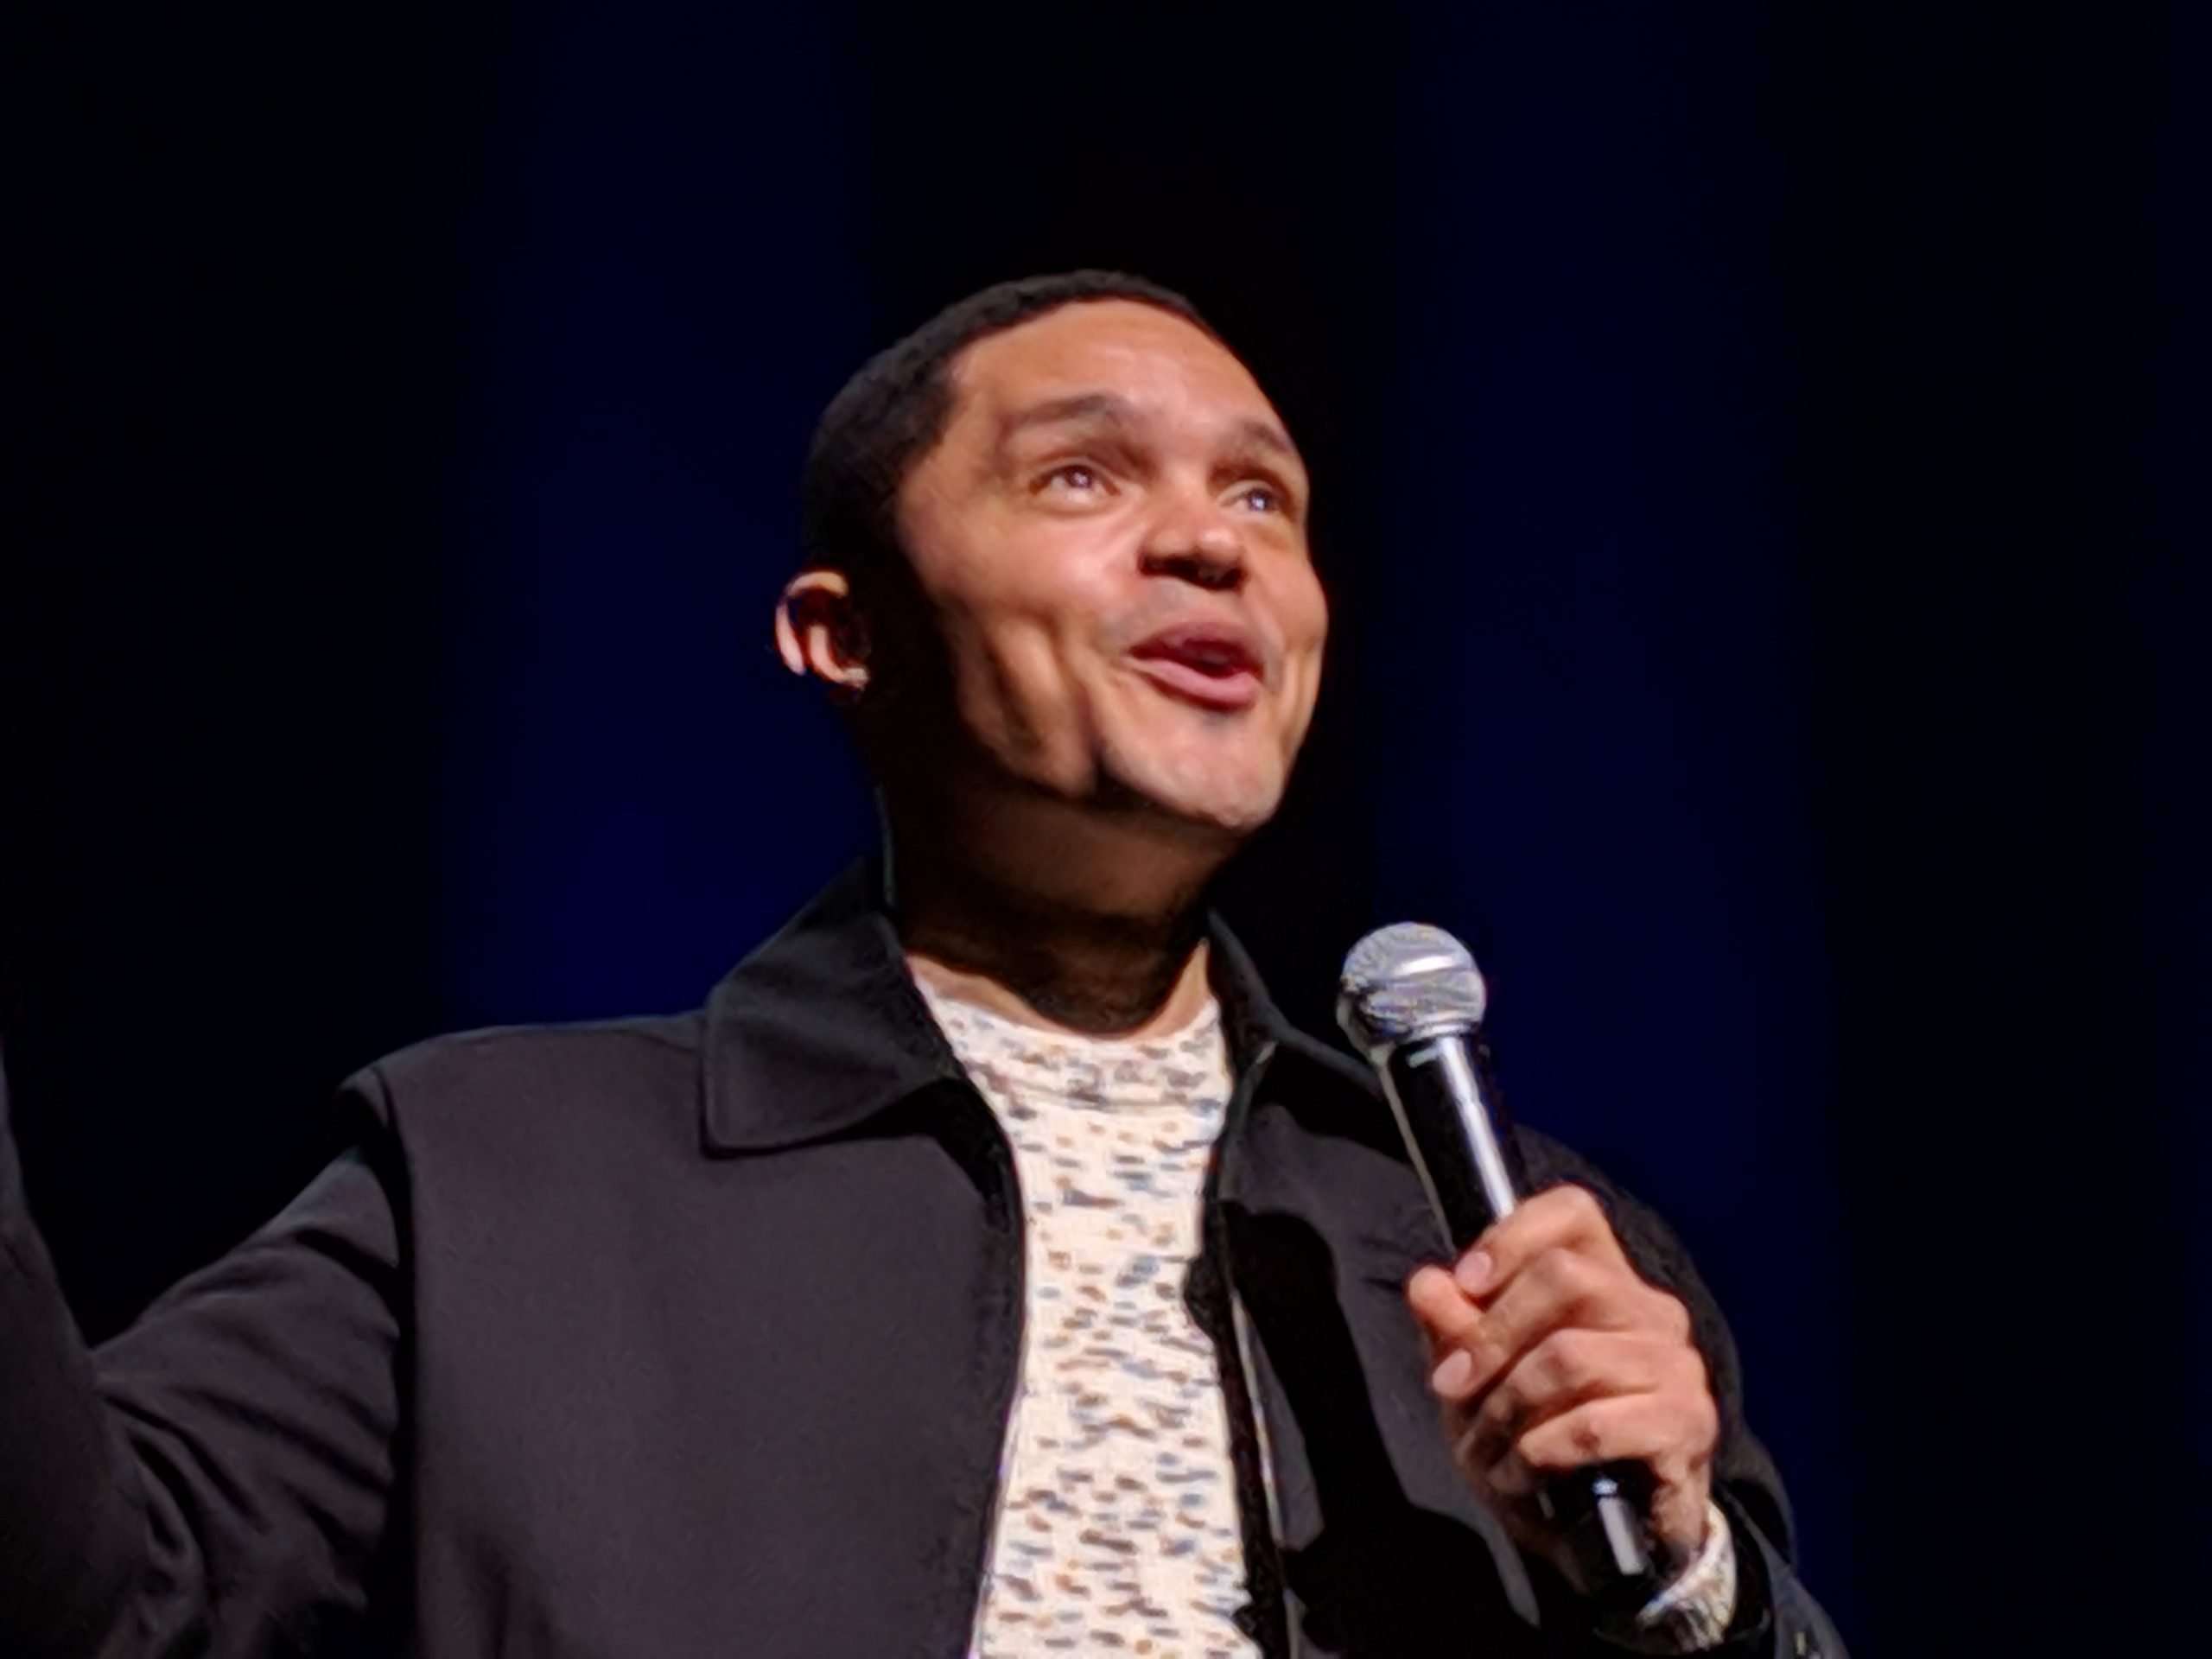 Trevor Noah Live on Stage selling out Madison Square Garden